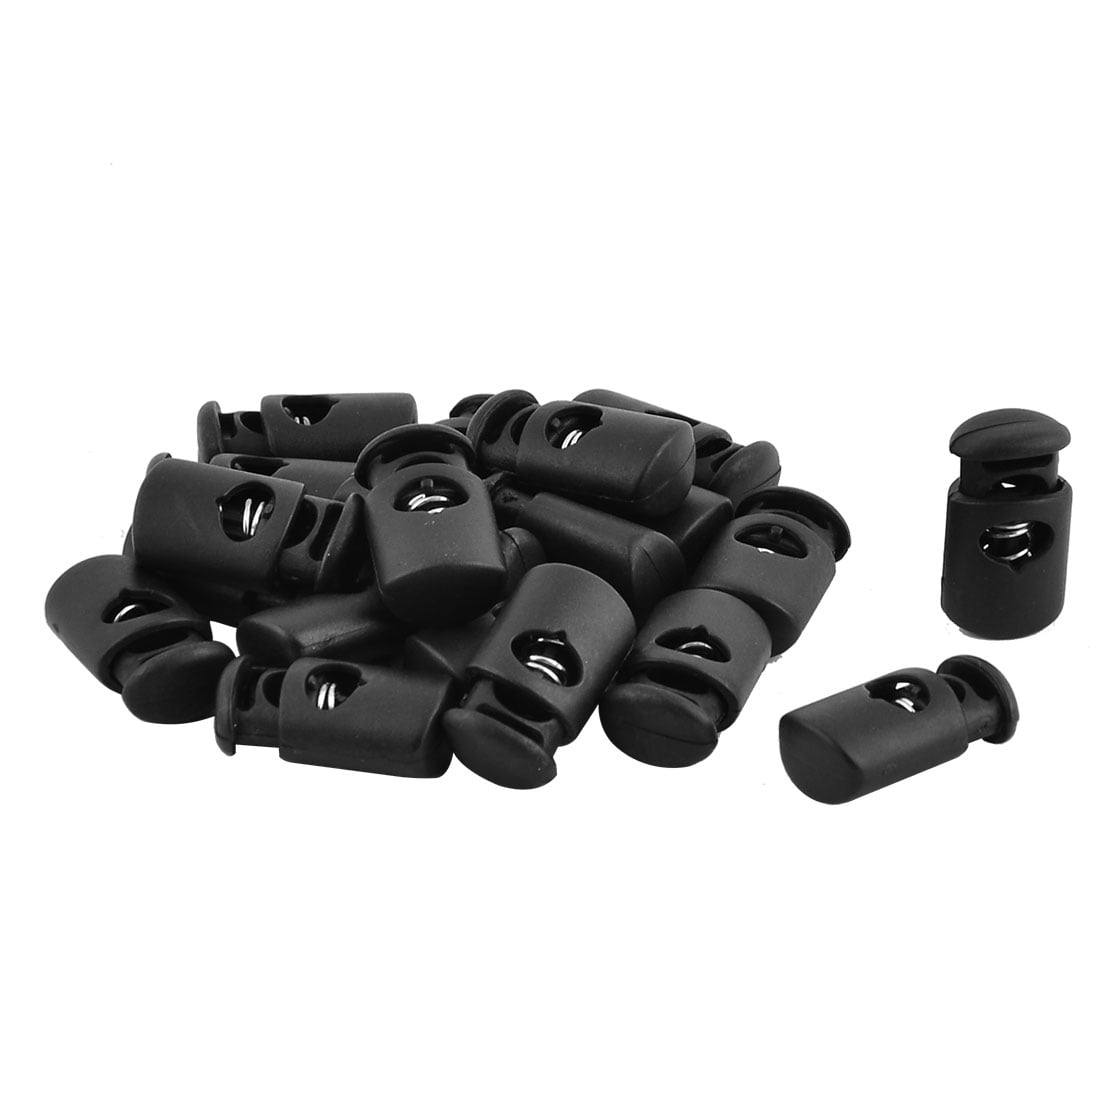 Cord Lock Plastic 10 Pcs - Double Cord Locks for Drawstrings - Cord Stops  for Drawstrings Toggle, Backpacks, Bags, Clothing, Camping, Black, OFXDD